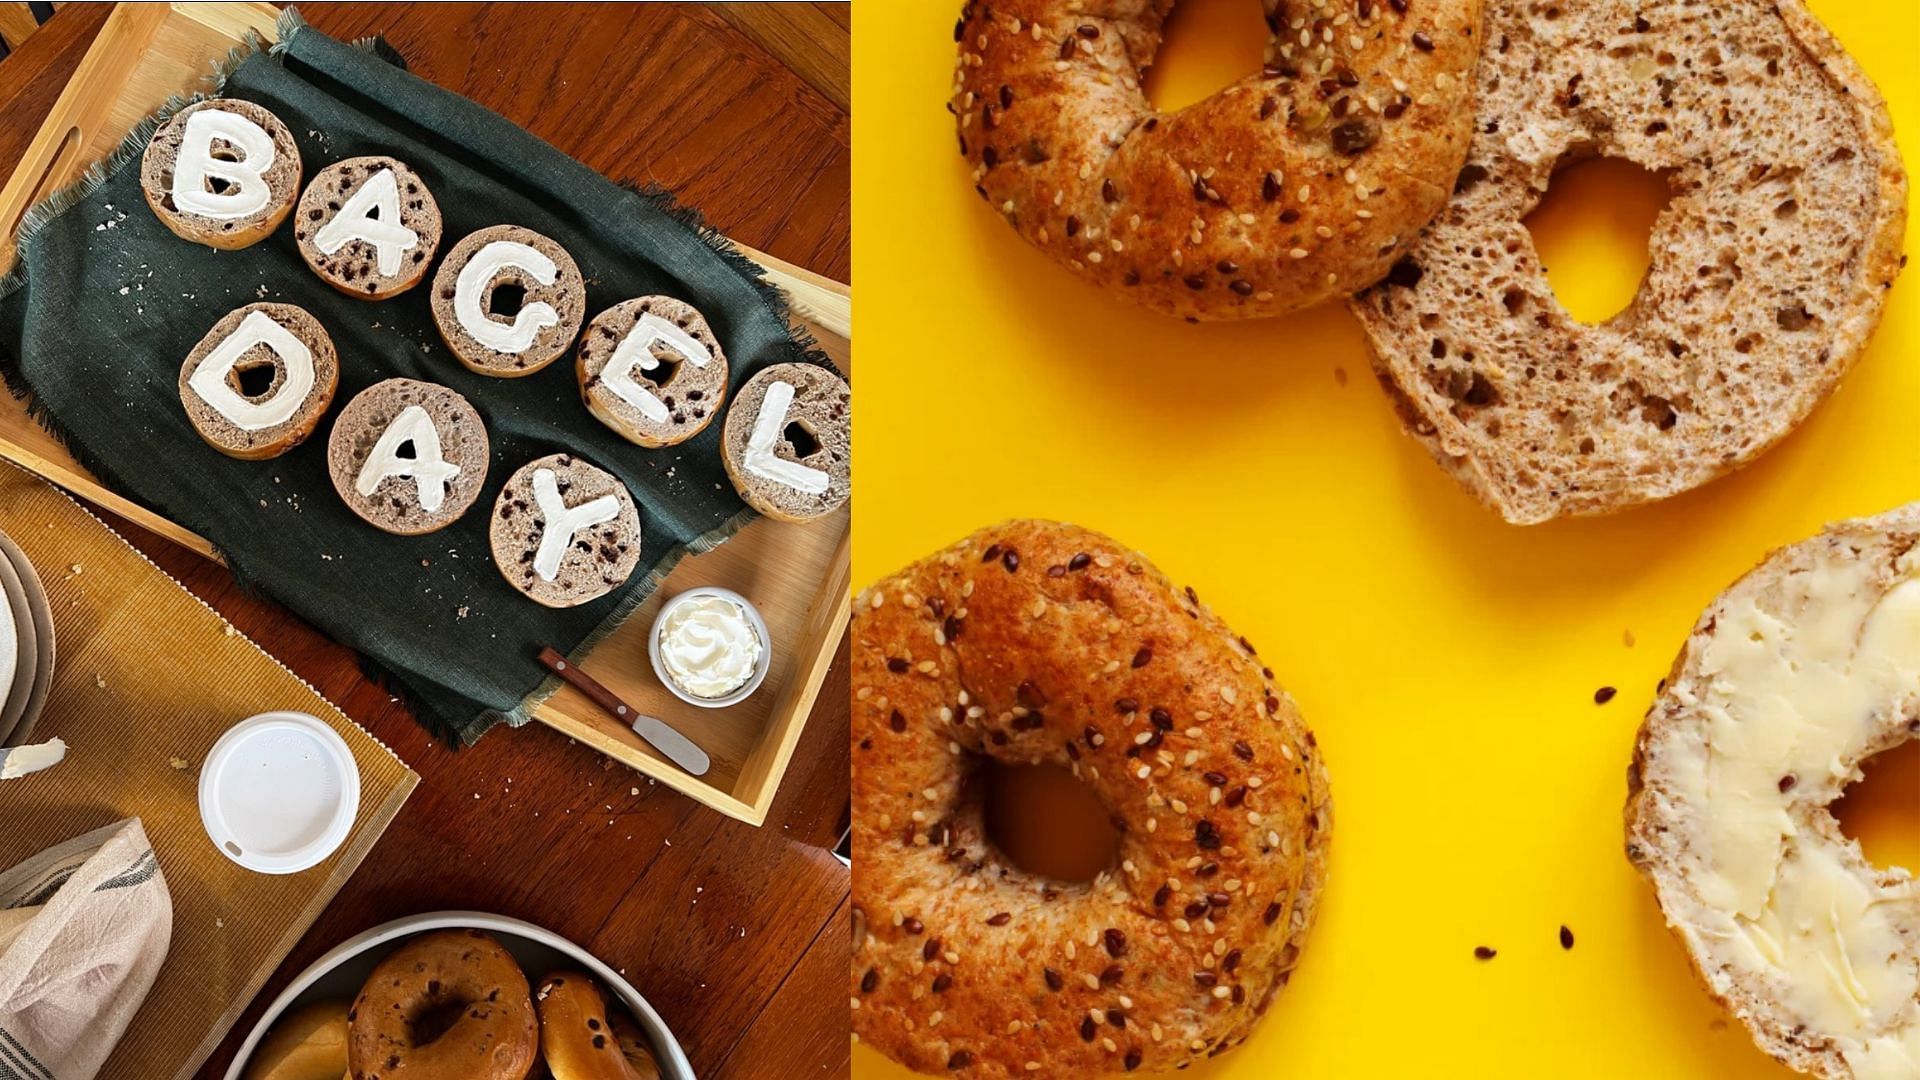 Enjoy special deals and offers on Bagels as America celebrates the National Bagel Day (Image via Panera)